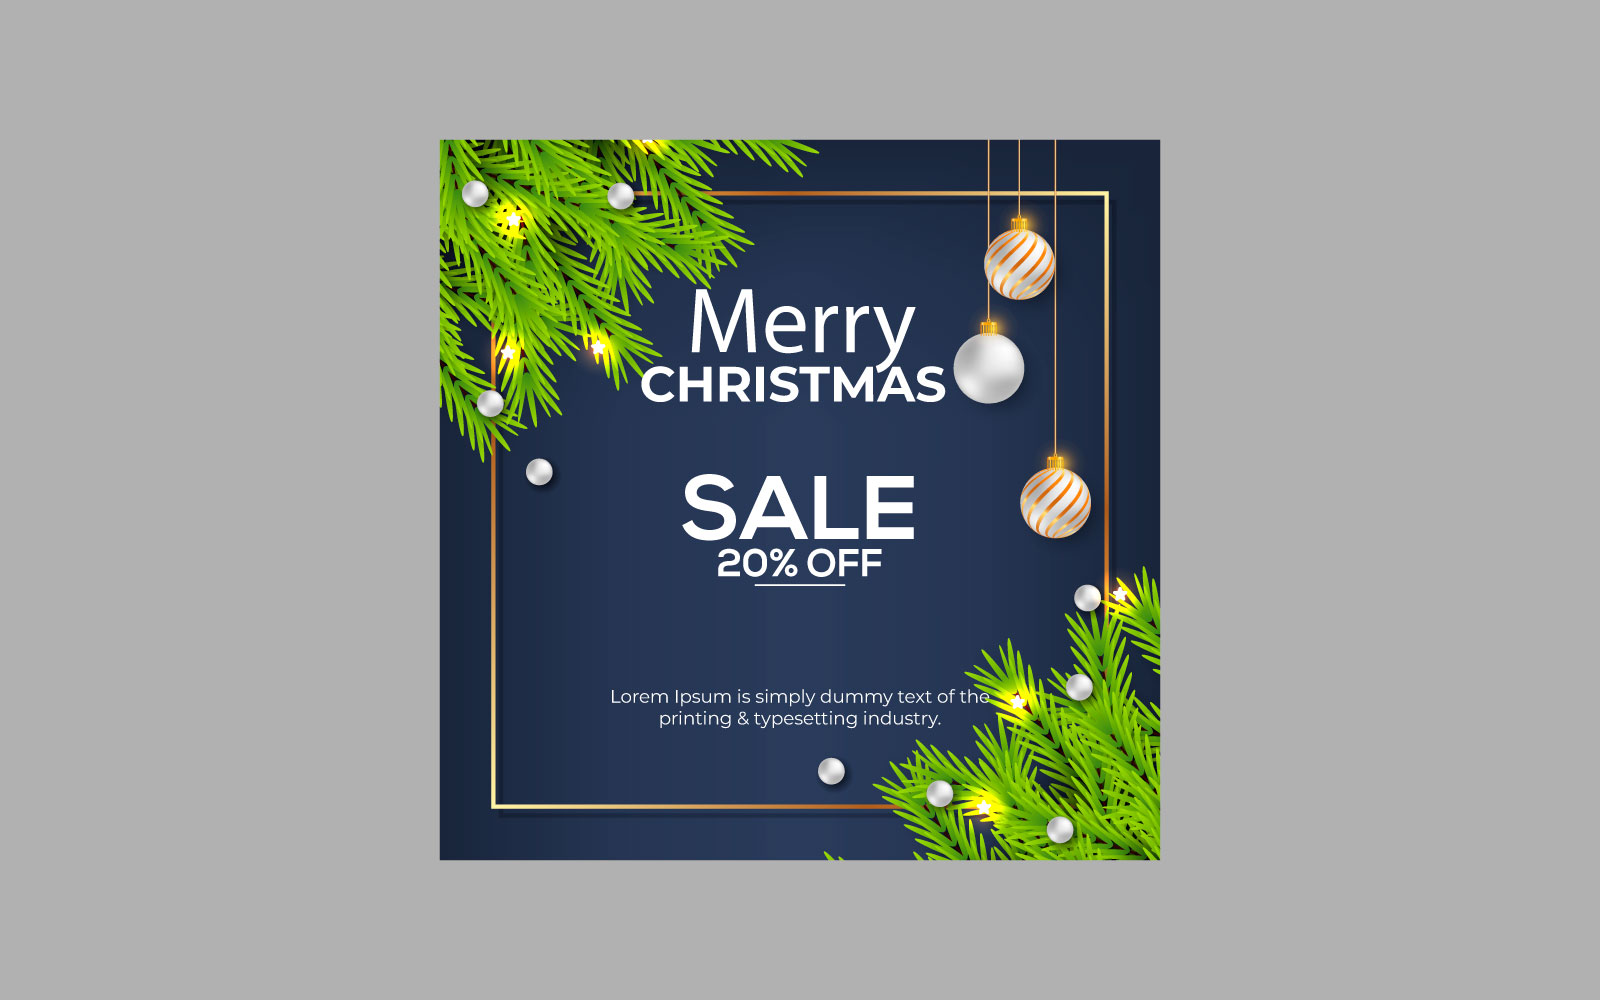 Merry Christmas sale post social media post decoration with pine branches and balls